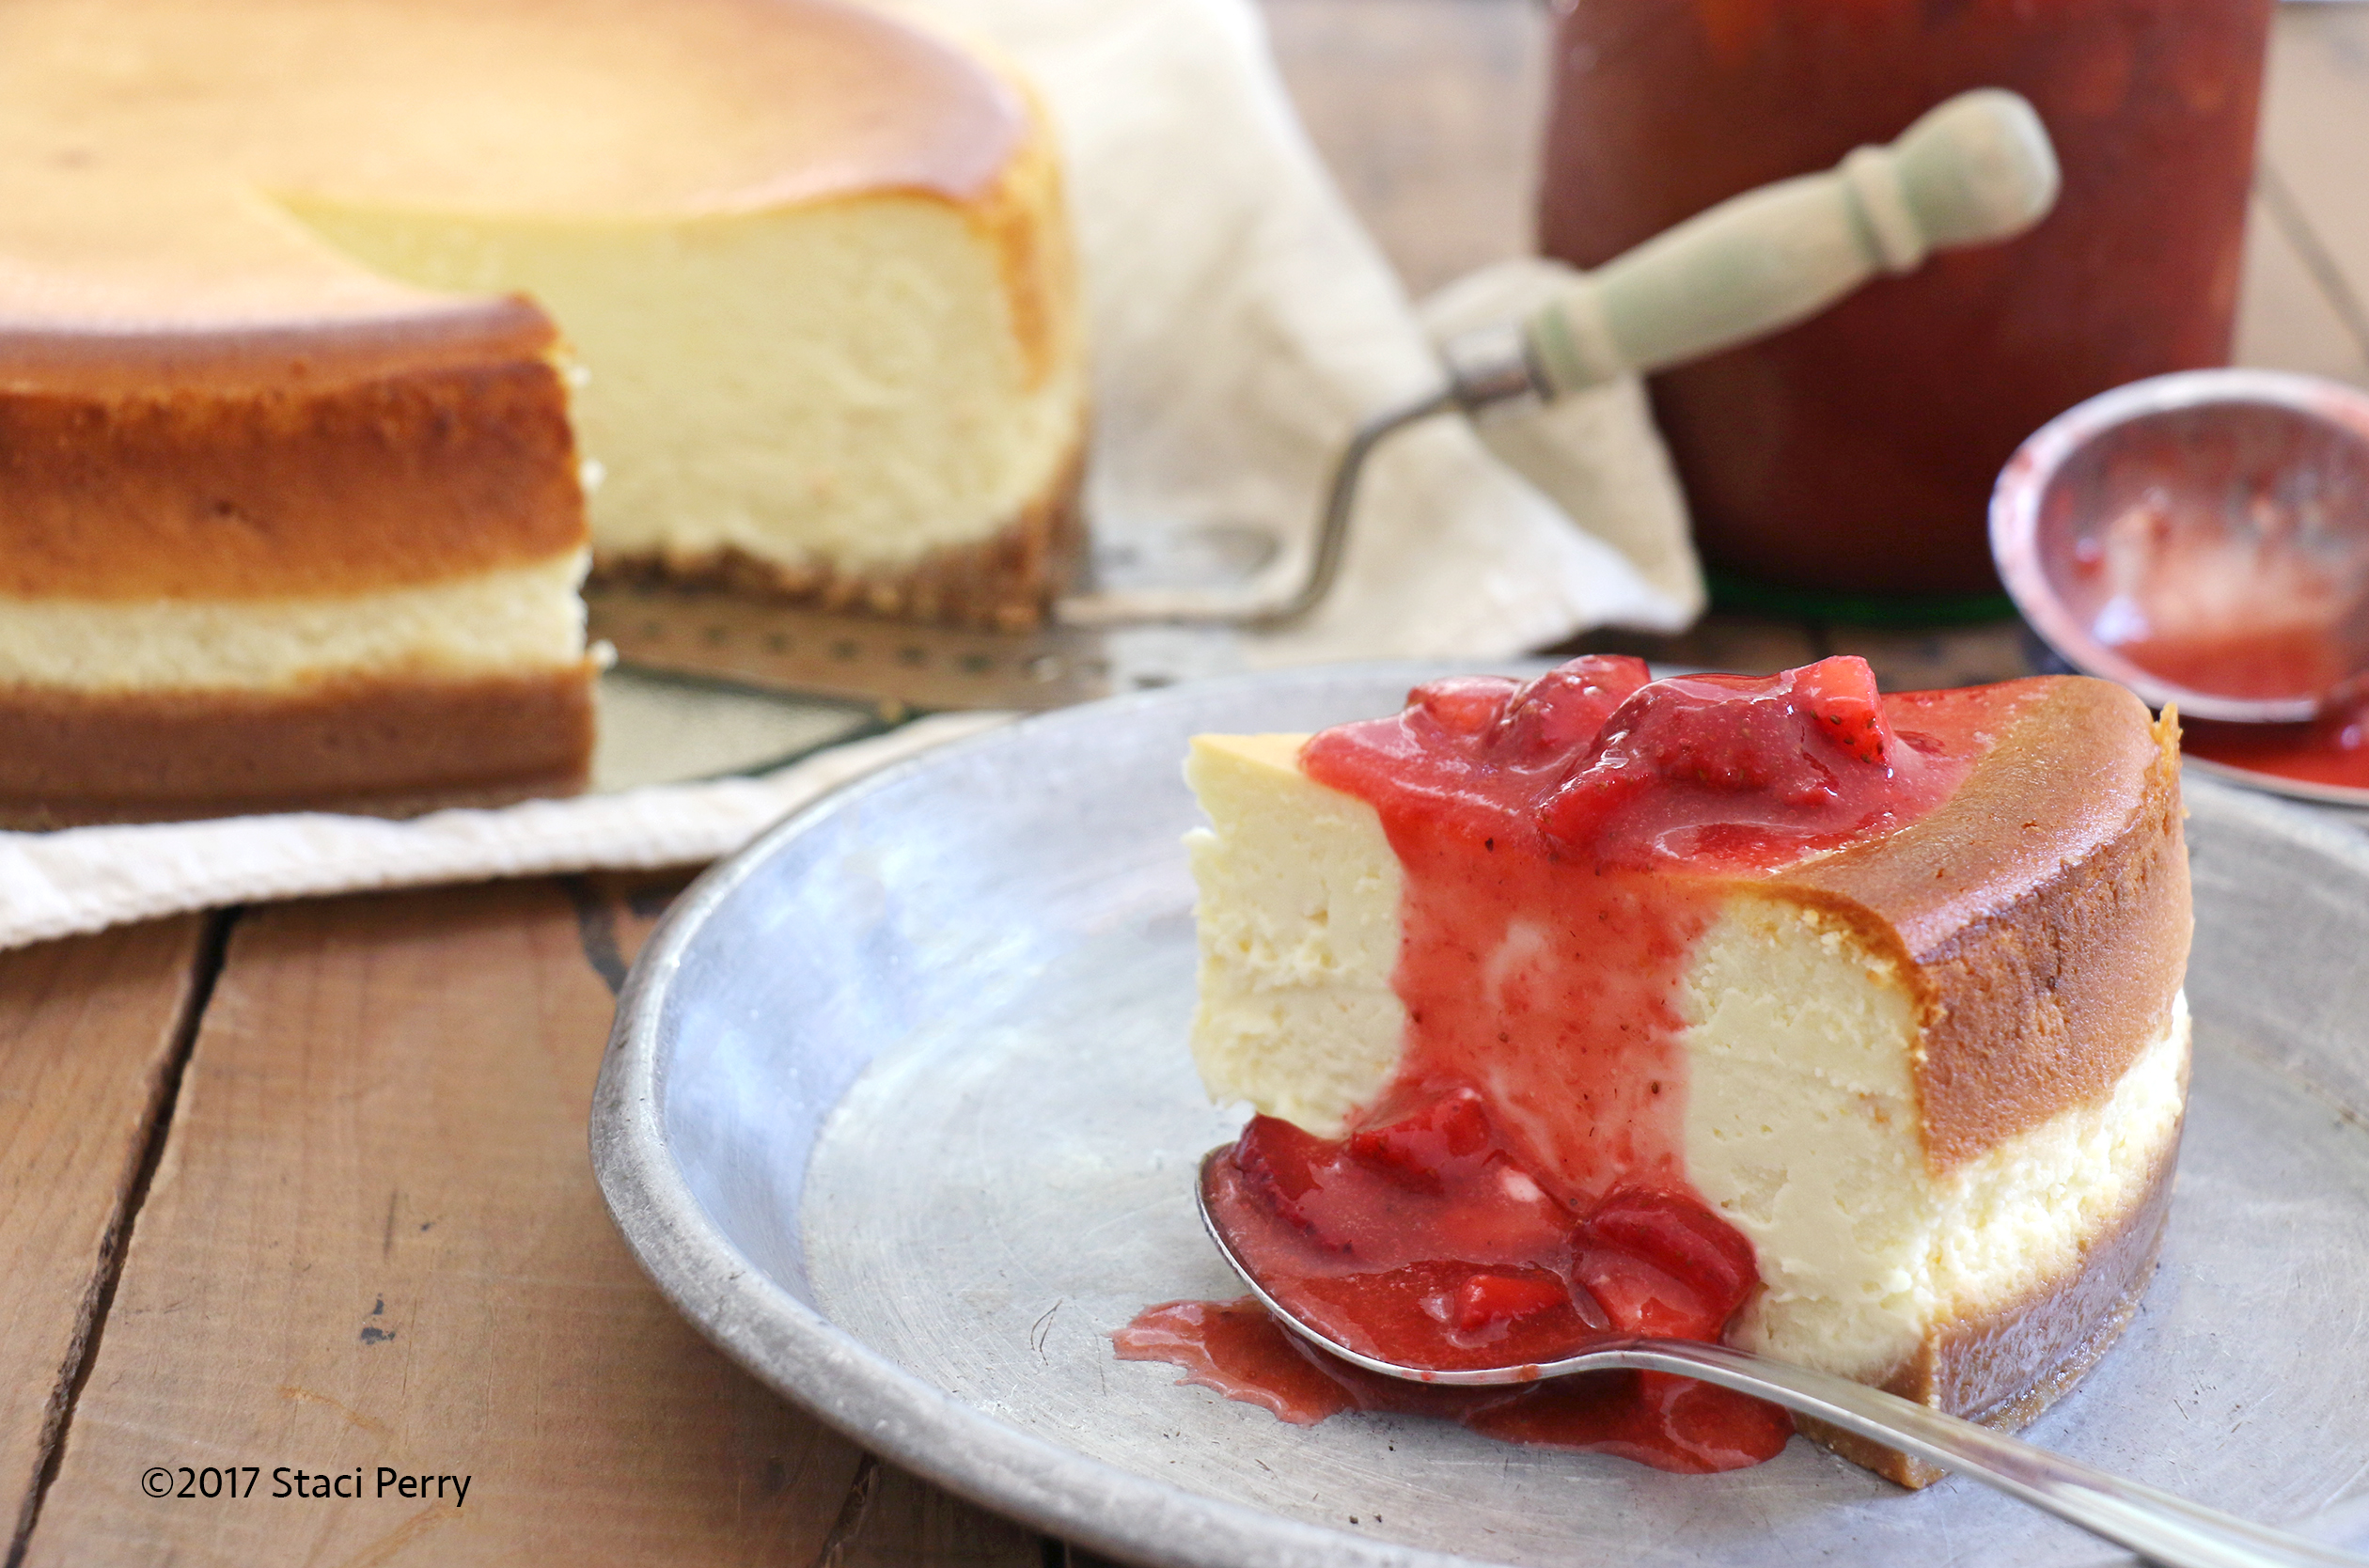 You Can Make Your Own, New York Vanilla Cheesecake with Fresh Strawberry Sauce